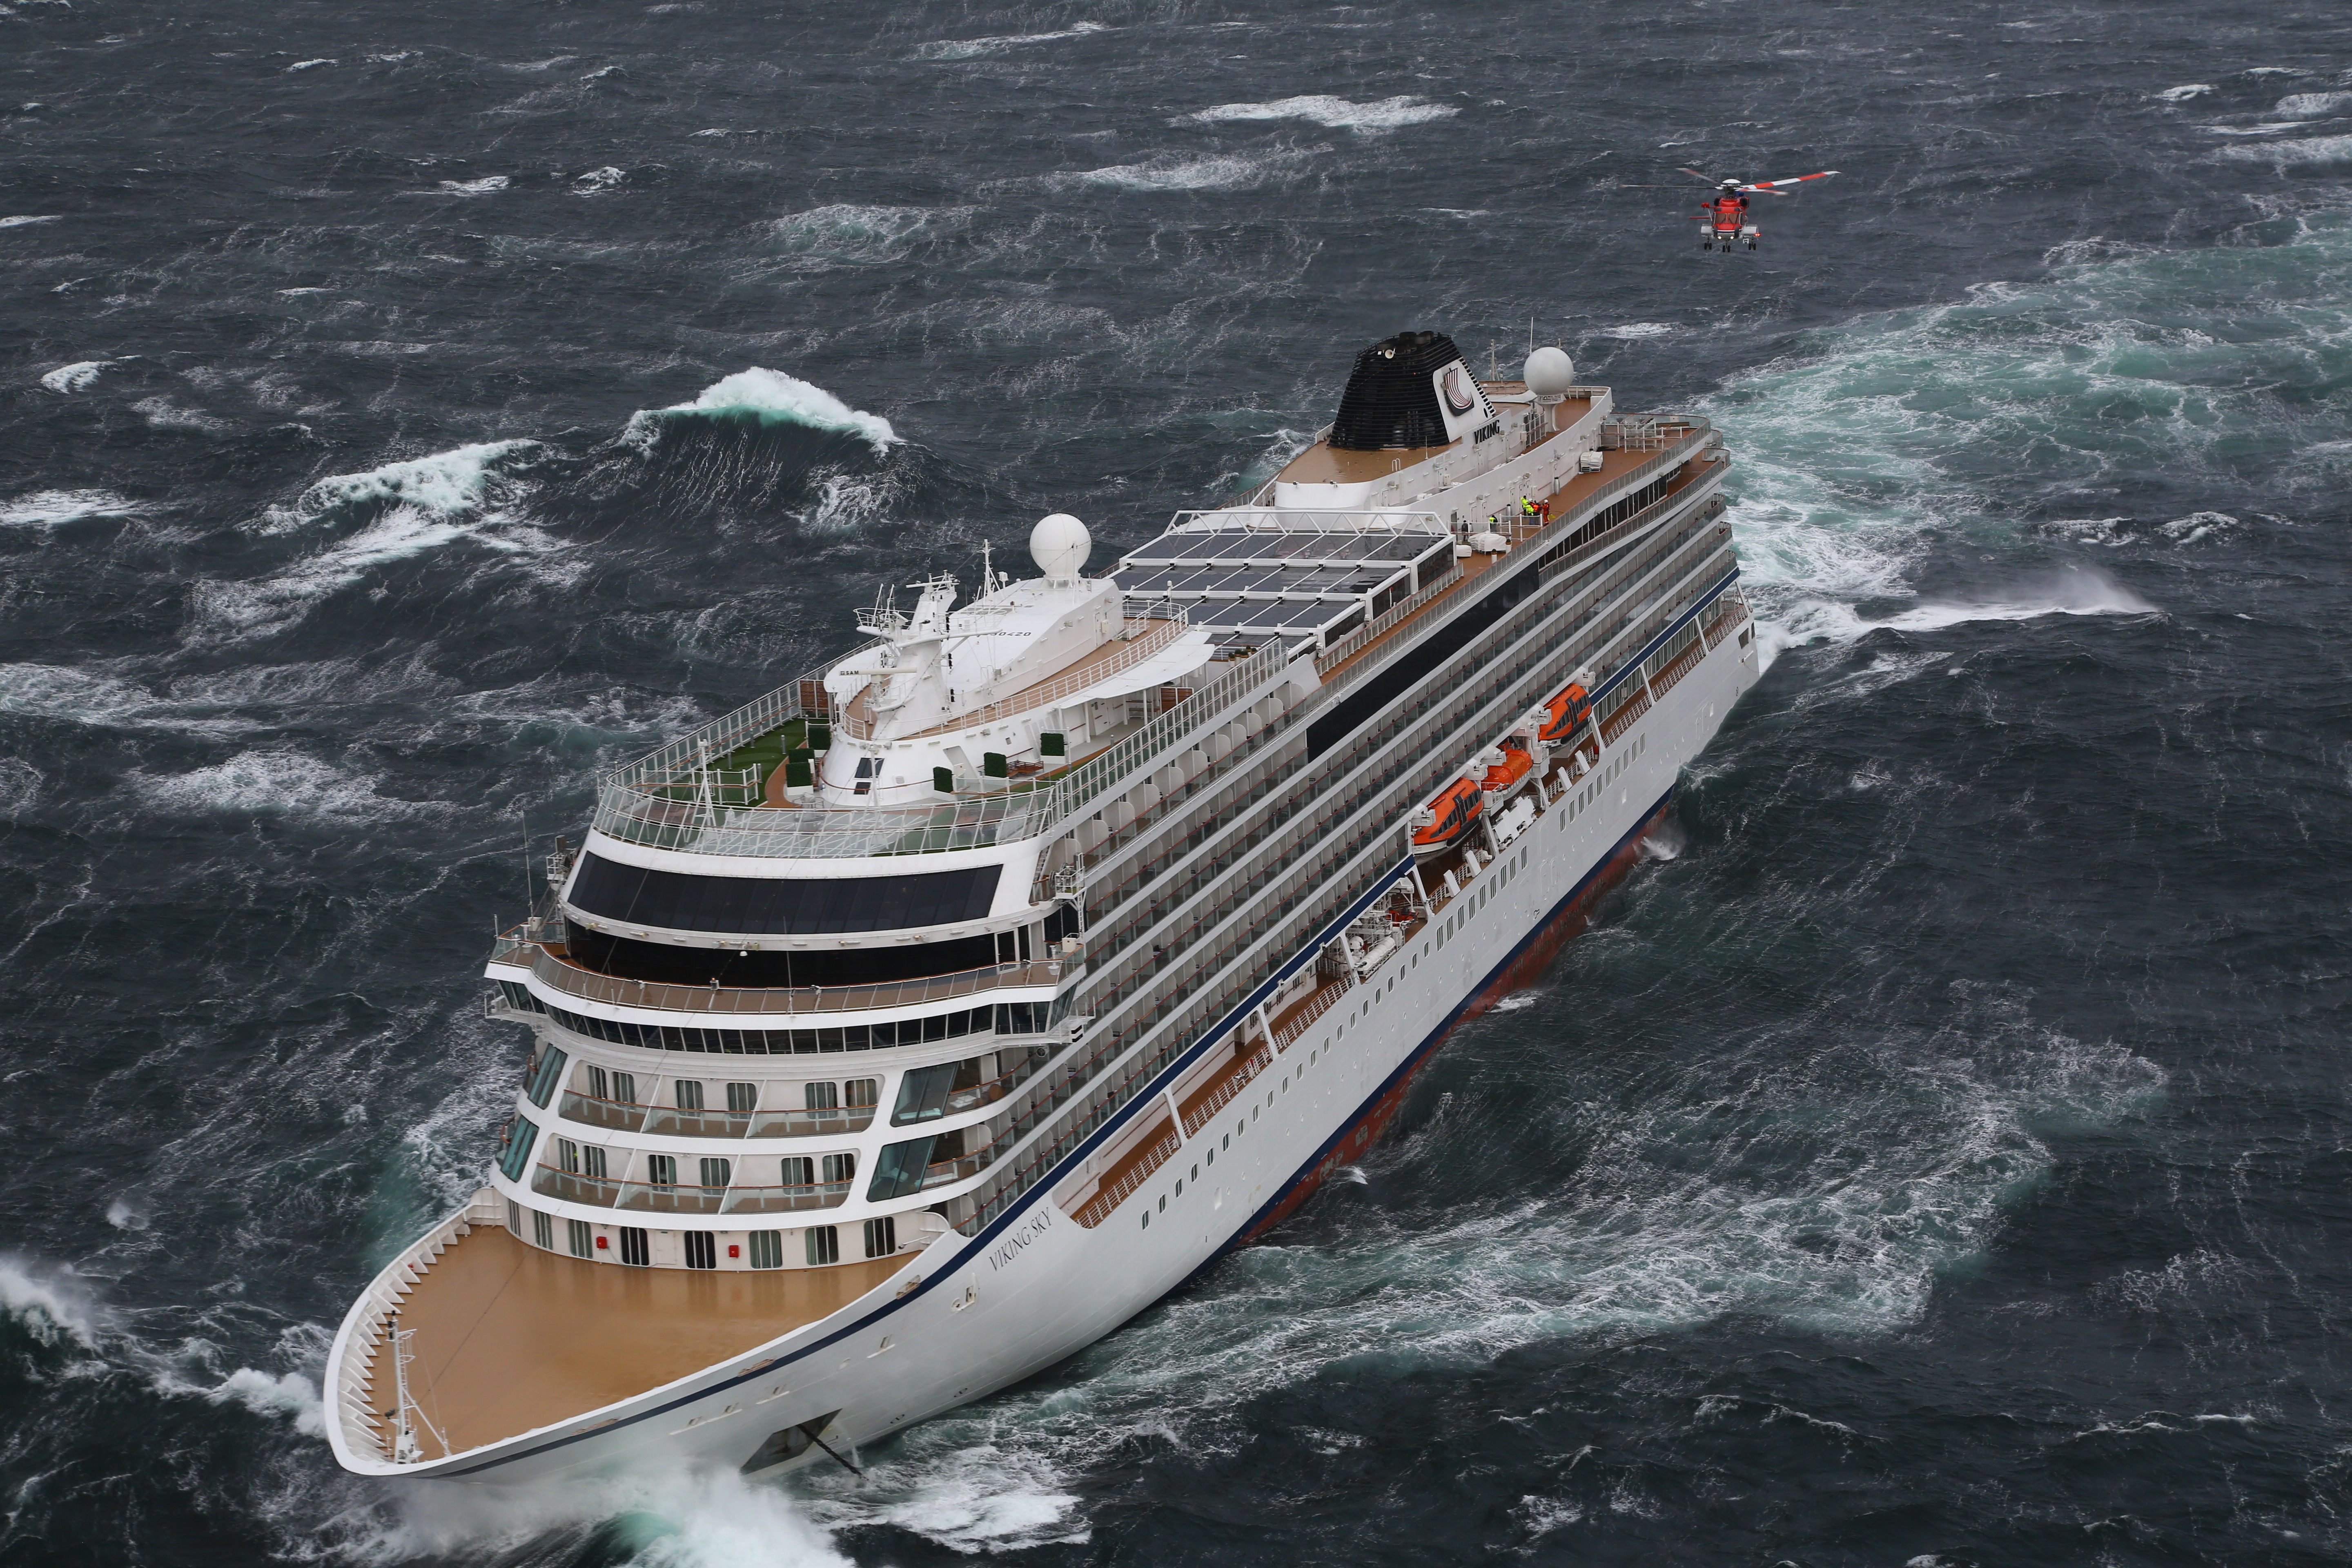 A rescue operation lasted more than 18 hours for passengers on the Viking Sky cruise ship. PIC: CHC Helicopter